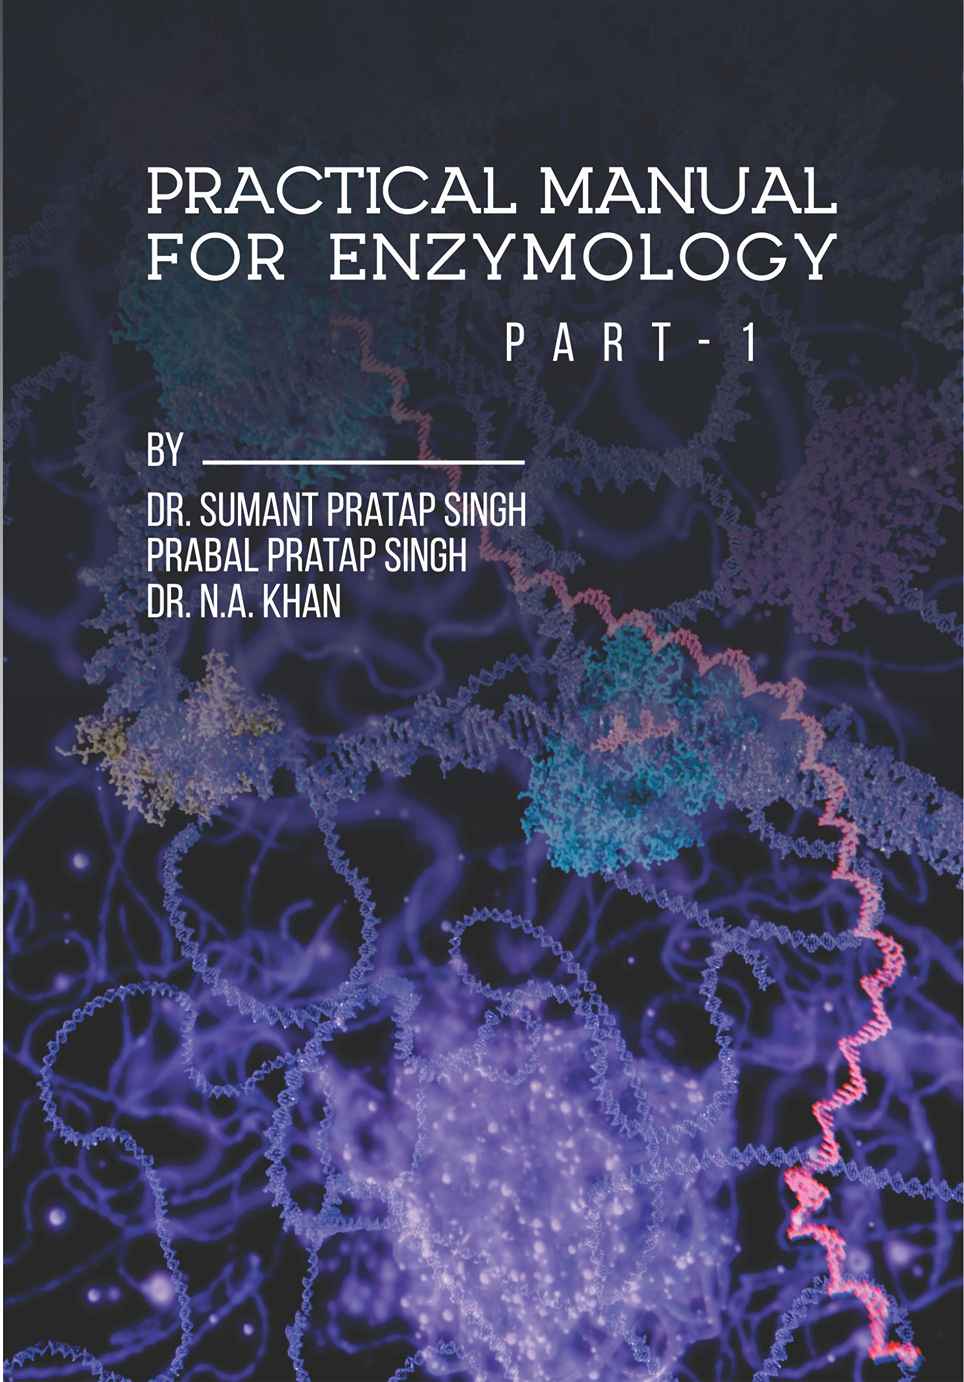 Practical Manual For Enzymology Part-1